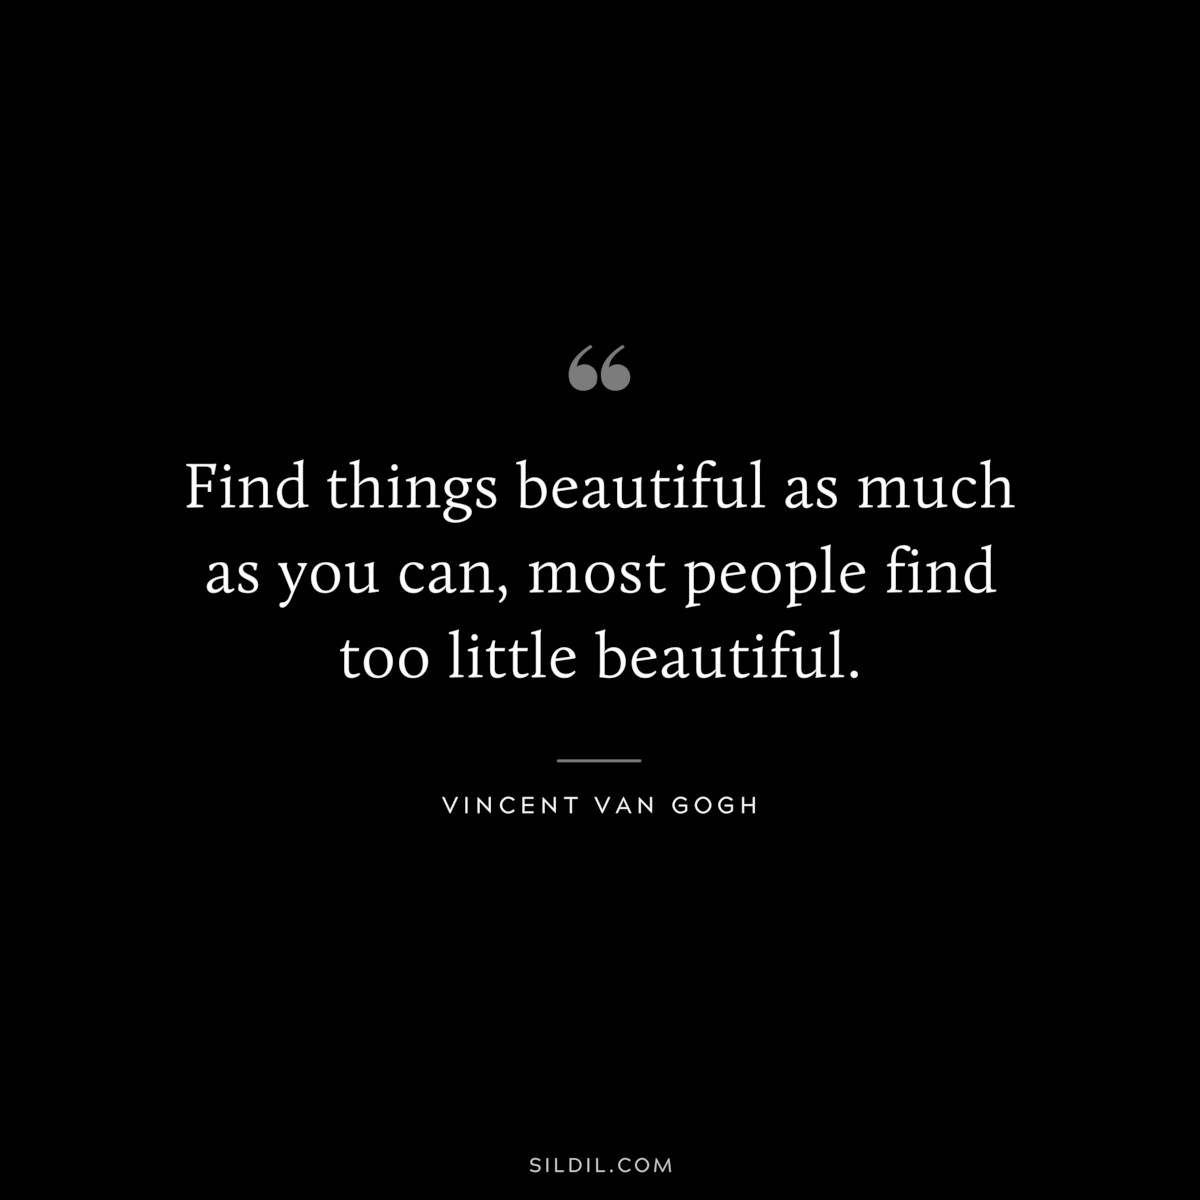 Find things beautiful as much as you can, most people find too little beautiful. ― Vincent van Gogh